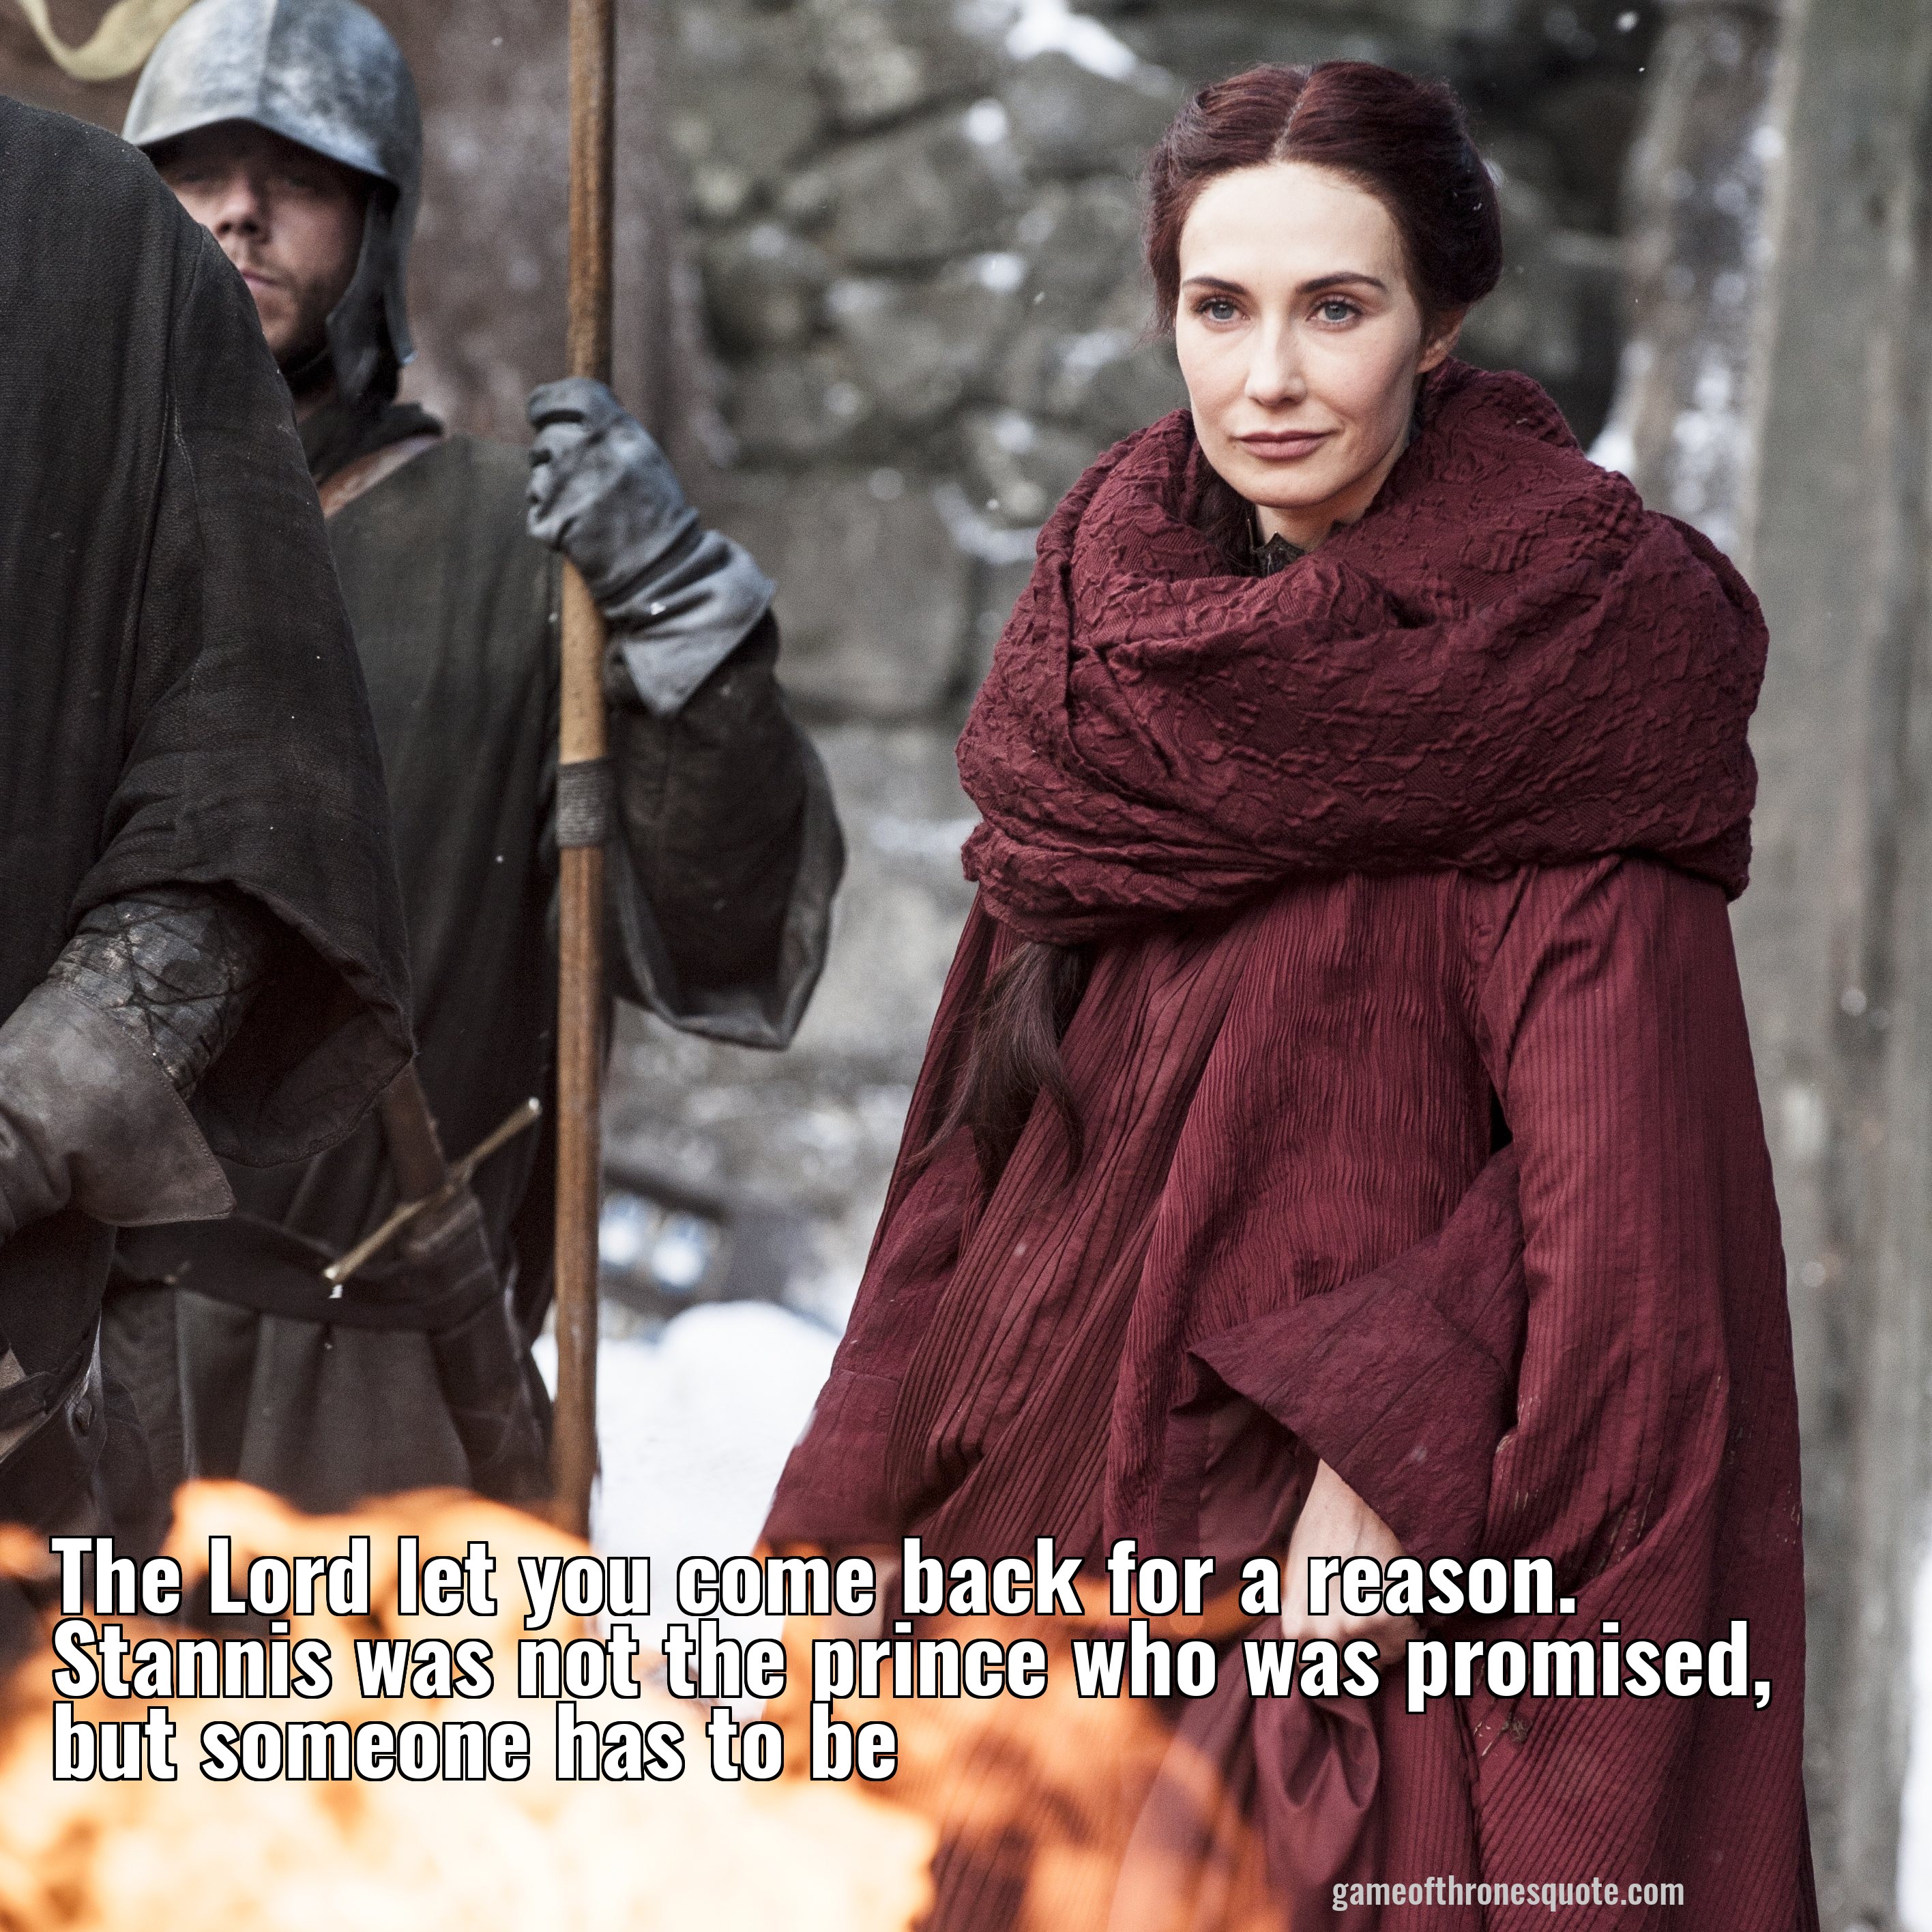 The Lord let you come back for a reason. Stannis was not the prince who was promised, but someone has to be